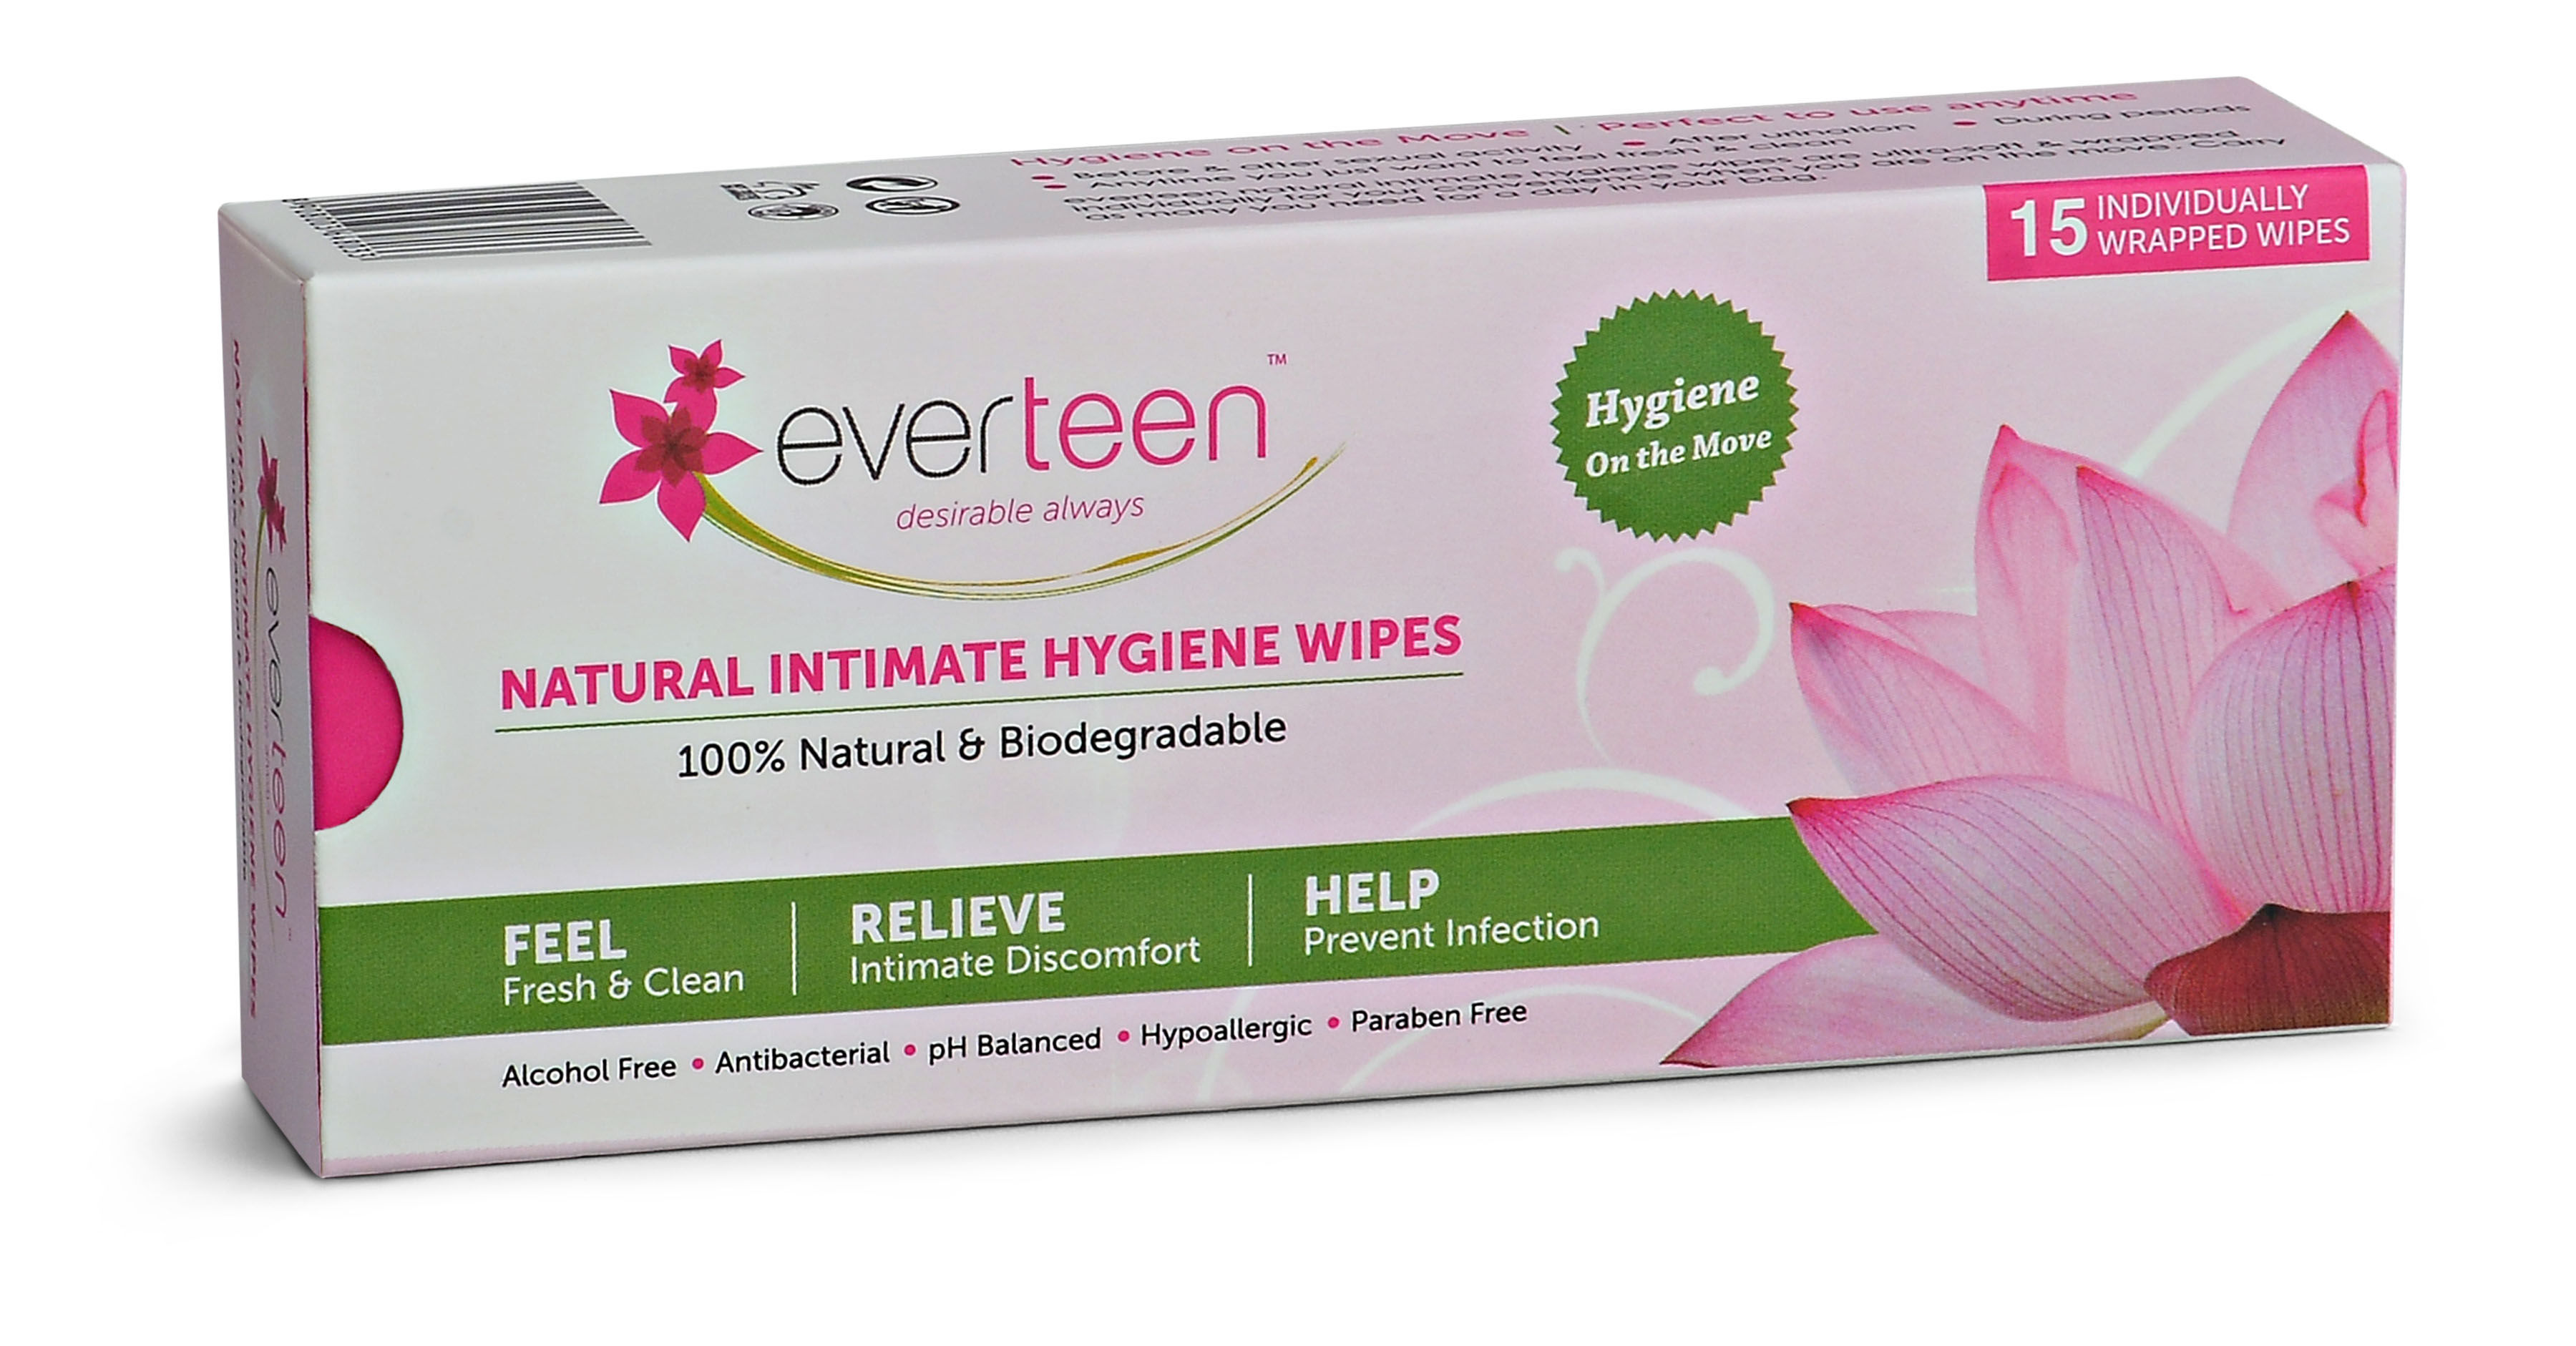 Free Everteen Natural Intimate Hygiene Wipes (Individually Wrapped)